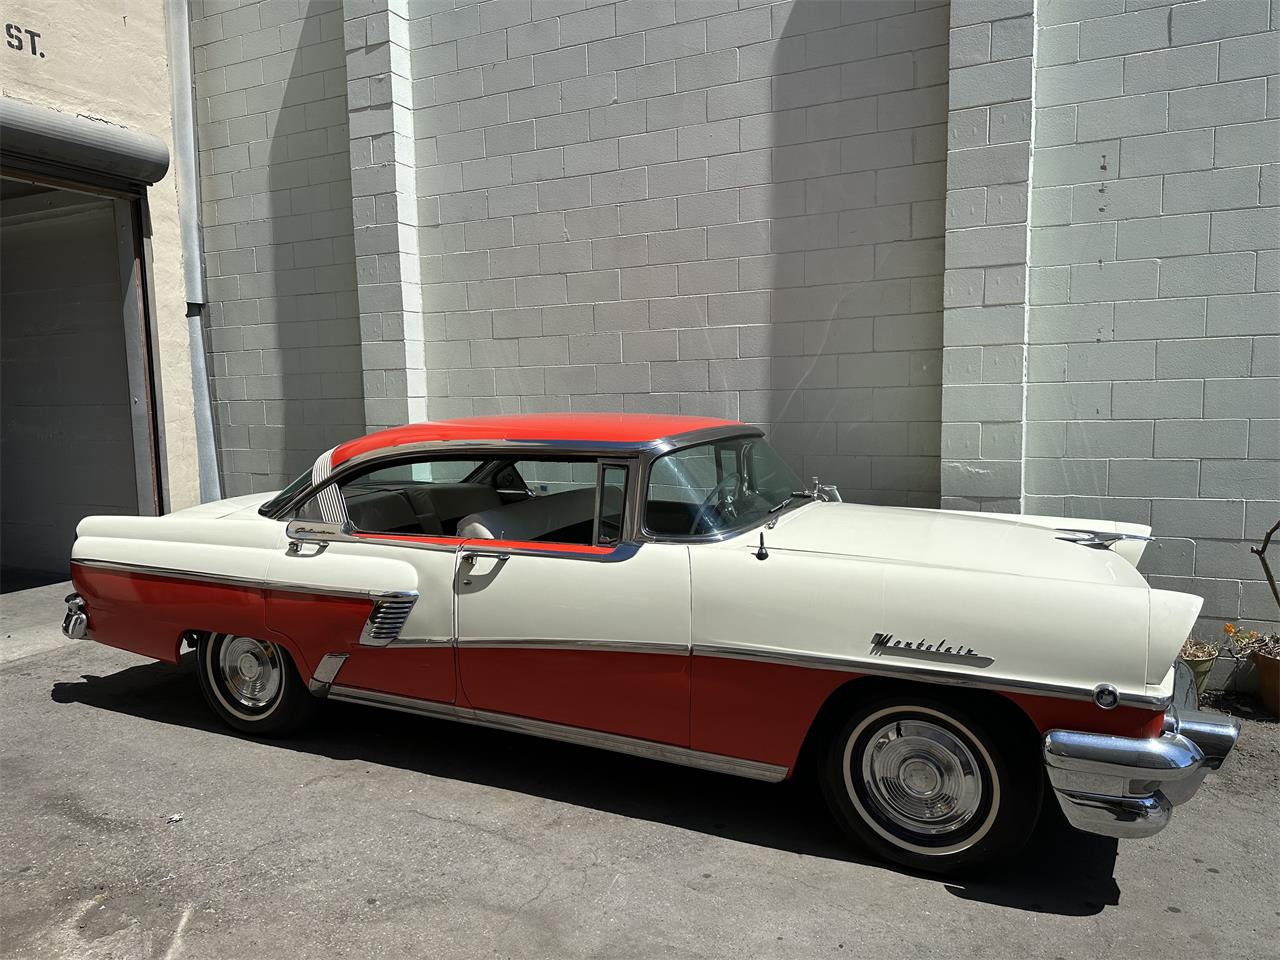 For Sale: 1956 Mercury Montclair in OAKLAND, California for sale in Oakland, CA